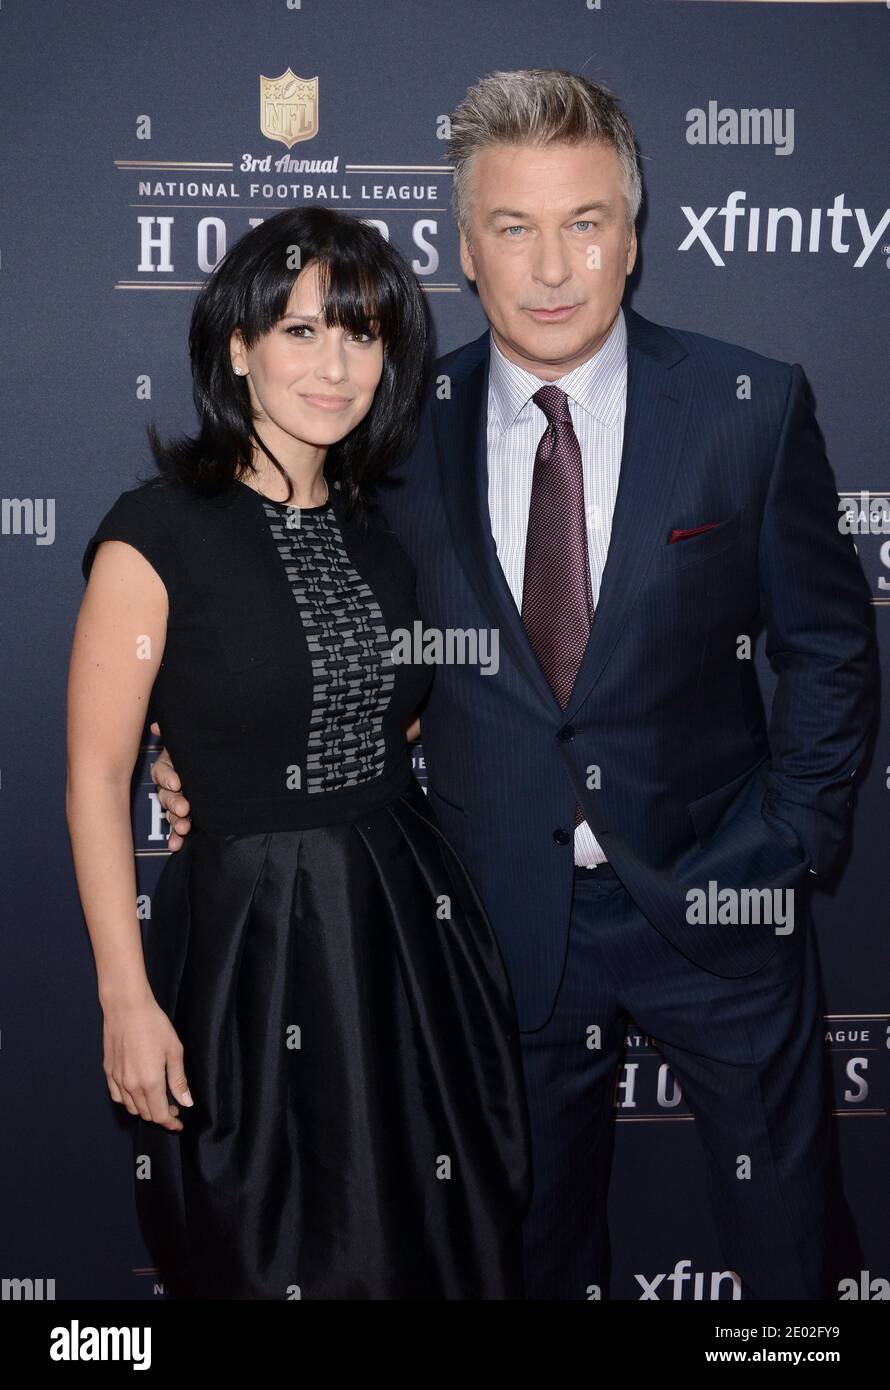 File photo dated February 1st, 2014 of Hilaria Baldwin and Alec Baldwin attend the 3rd Annual NFL Honors at the Radio City Music Hall in New York City, NY, USA. Hilaria Baldwin has responded to claims she misled the public about her Spanish heritage. Ms Baldwin, a popular yoga instructor, has been accused on social media of faking her Spanish accent. In a seven-minute video on Instagram, Ms Baldwin said she was born in Boston but was partly raised in Spain. However, her management's biography of her states that she was born on the Spanish island of Mallorca. Photo by Lionel Hahn/ABACAPRESS.COM Stock Photo